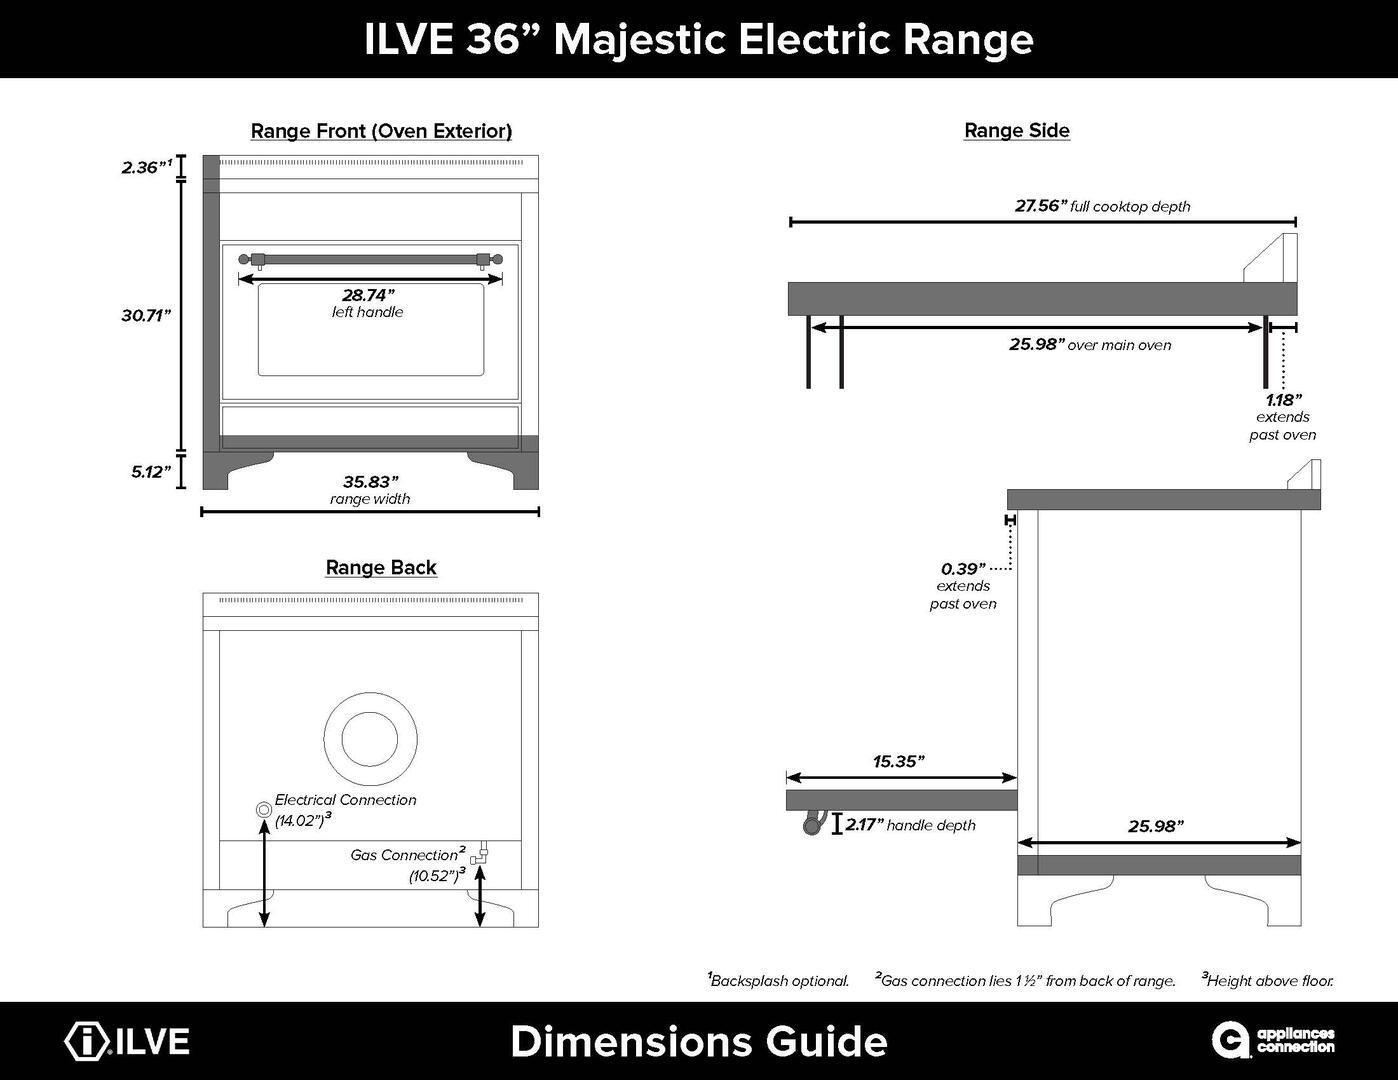 Ilve UMI09NS3WHG 36 Inch Freestanding Electric Induction Range with 5  Elements, 3.5 Cu. Ft. Capacity, Storage Drawer, Self-Clean, True European  Convection, TFT Oven Control Display, and Triple Glass Cool Door: White,  Brass Trim